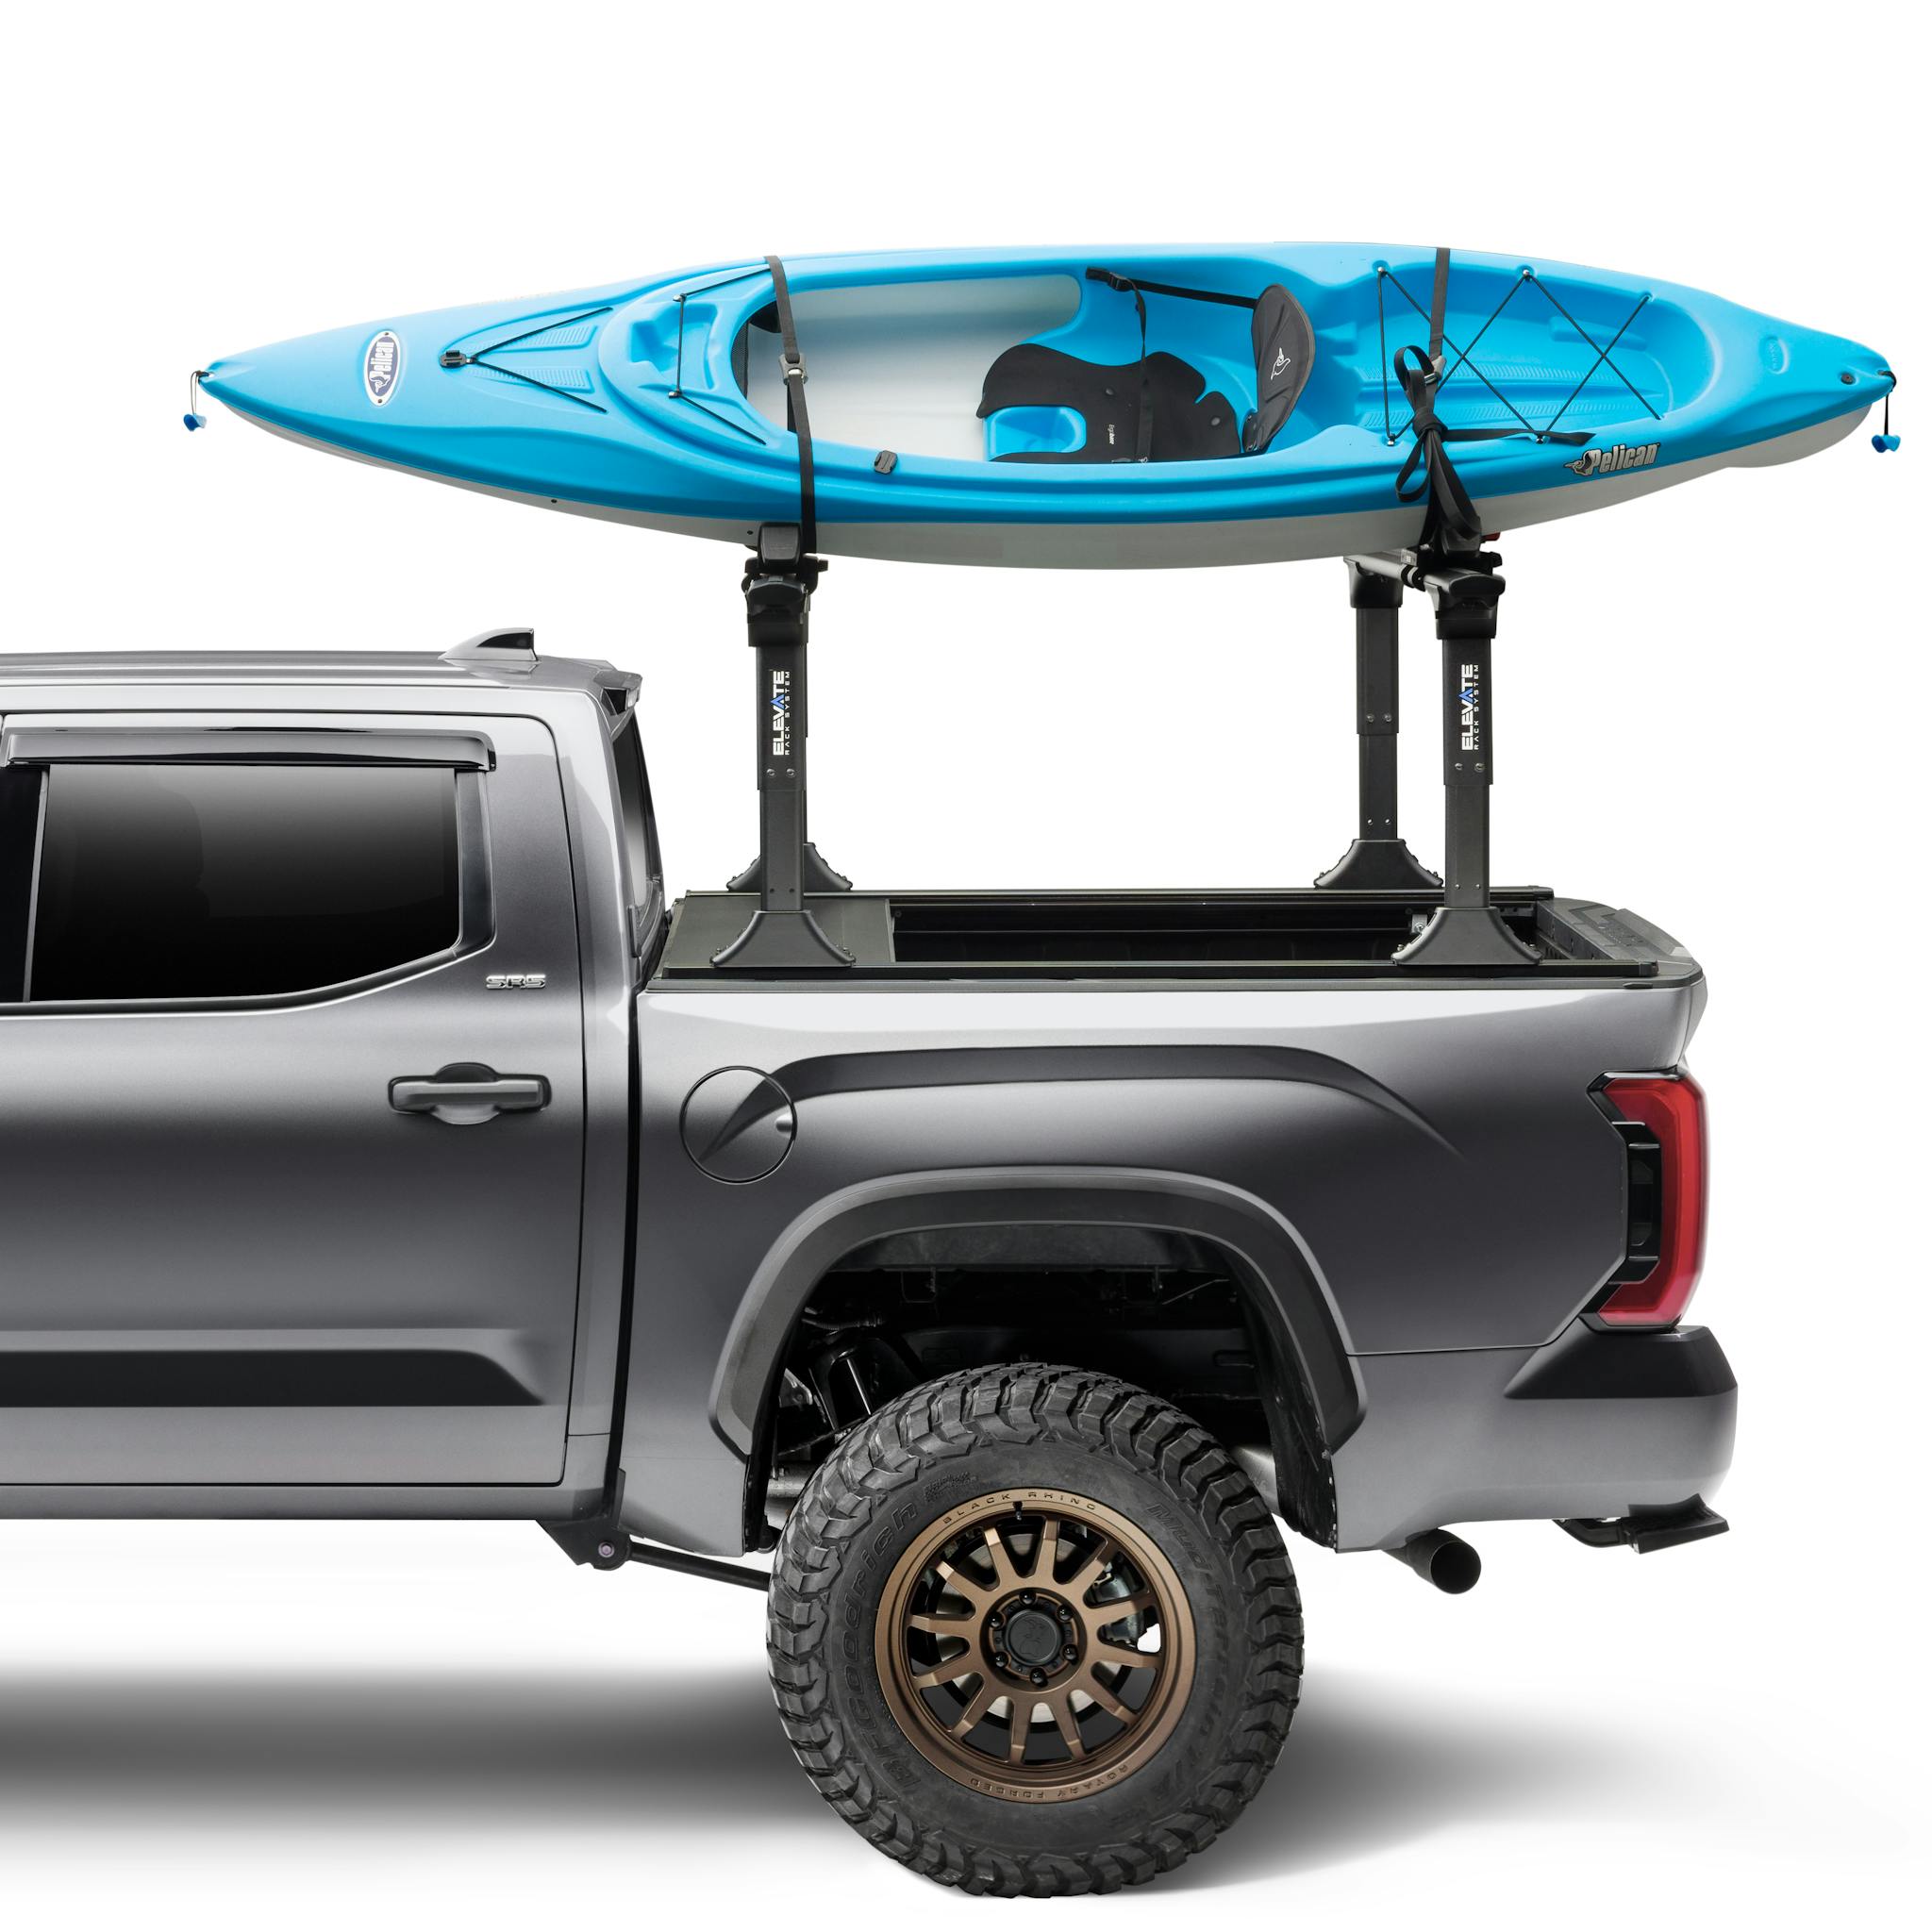 RetraxOne XR Tonneau Cover and TruXedo Elevate Truck Rack Side View with Kayak